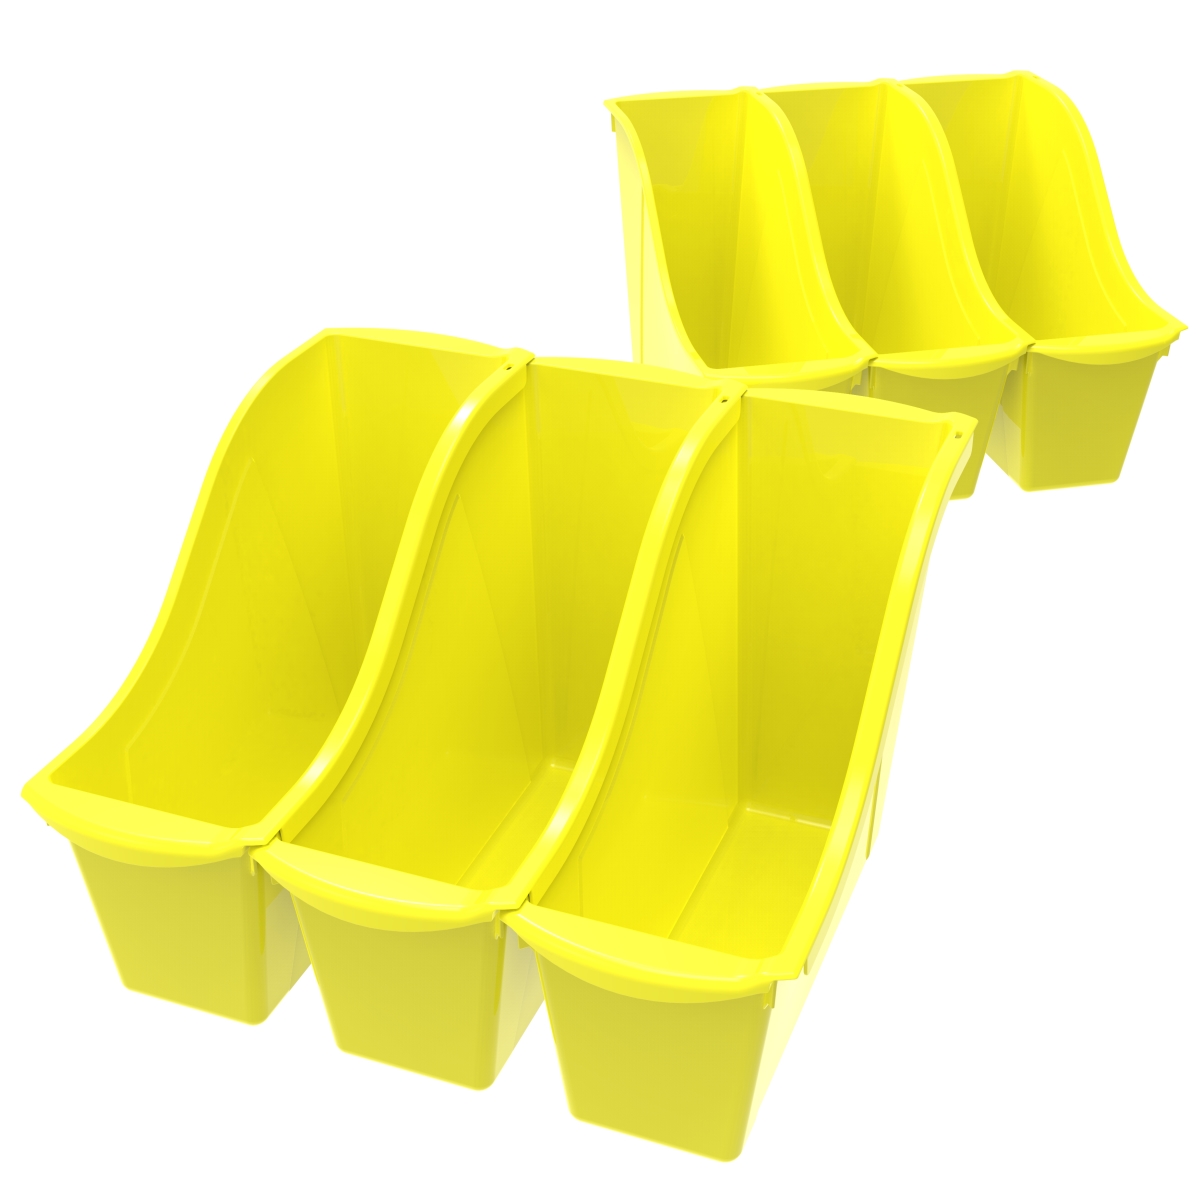 Picture of Storex 71112U06C Small Book Bin, Yellow - Pack of 6